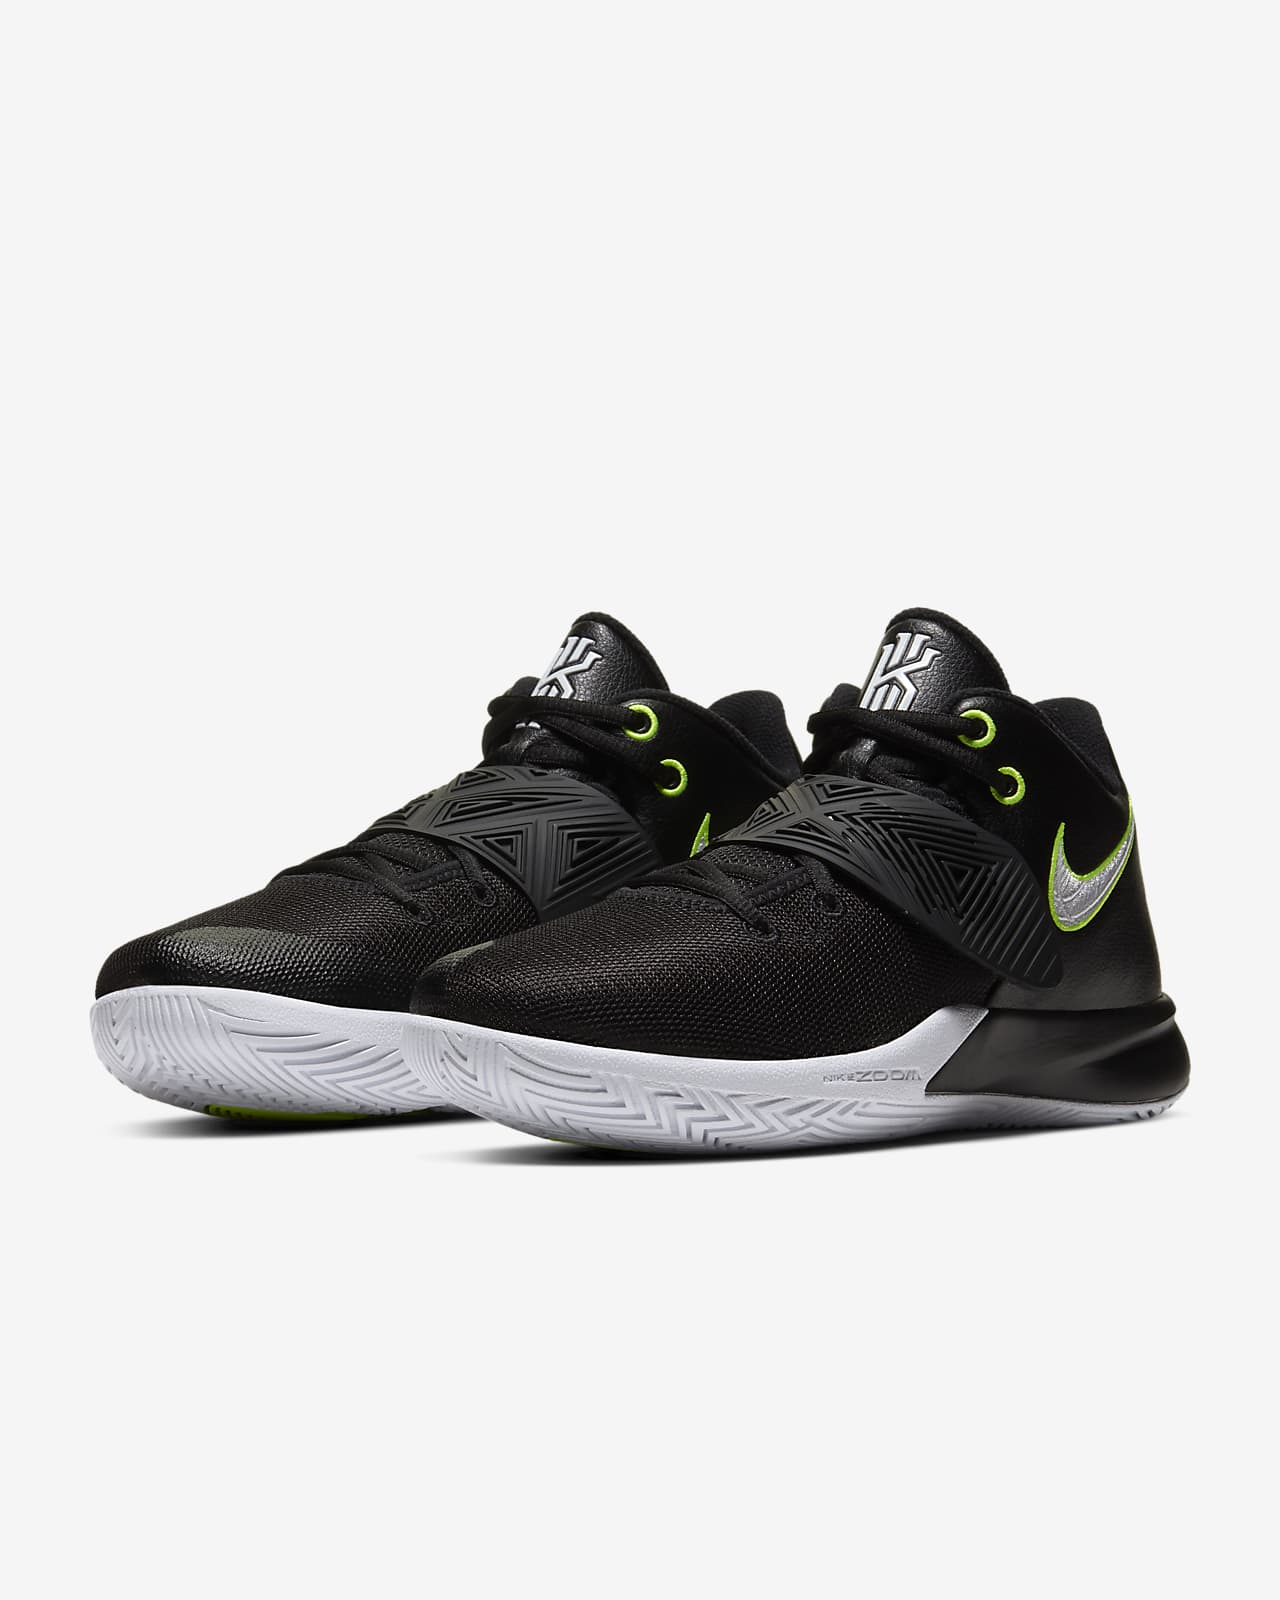 kyrie flytrap 3 black and white